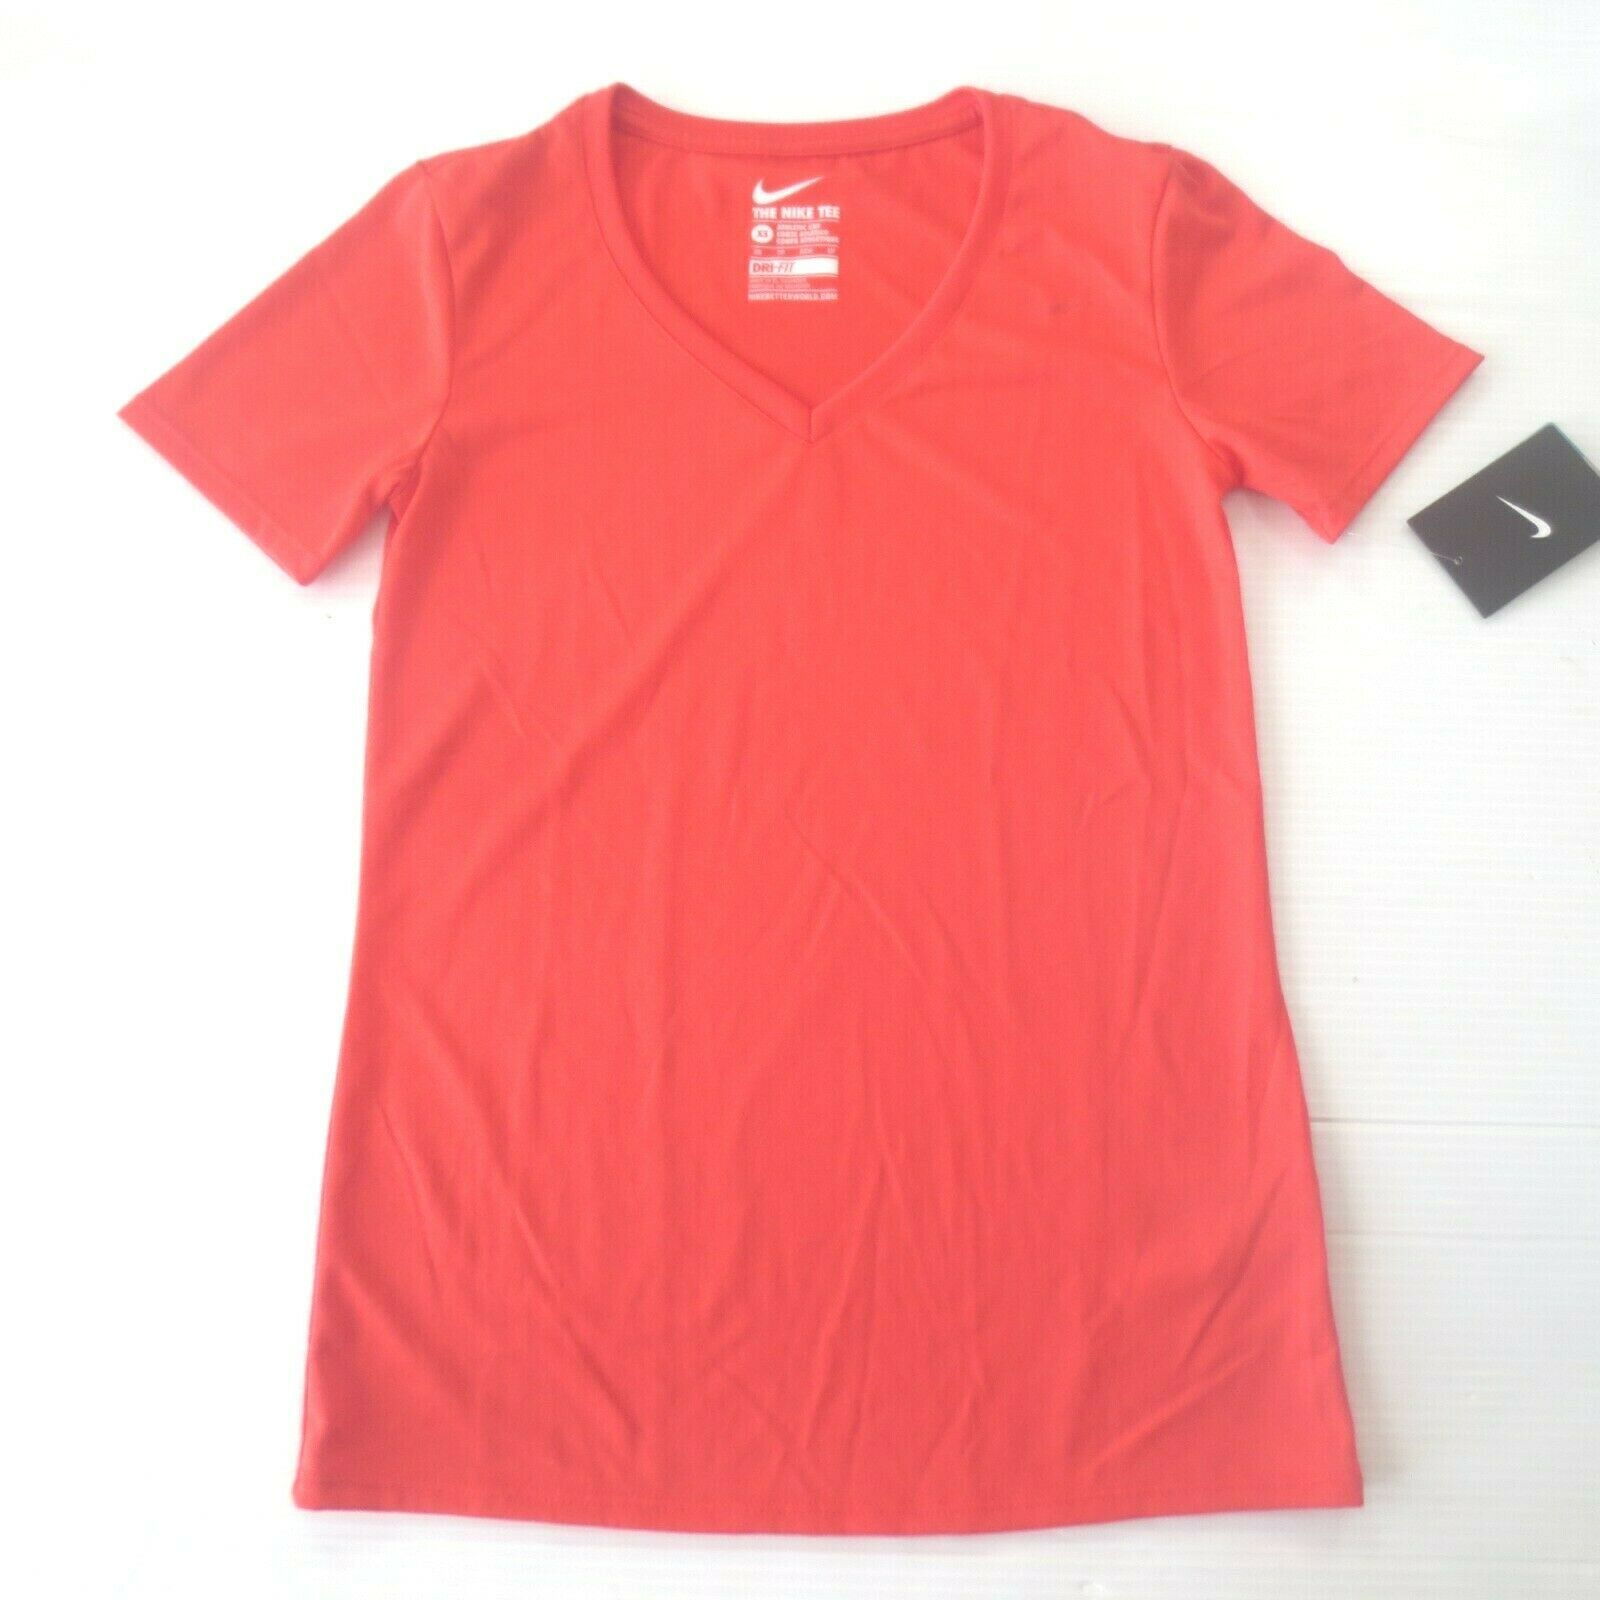 Primary image for Nike Women Legend SS Short Sleeve Shirt - 684683 - Red 696 - Size XS - NWT